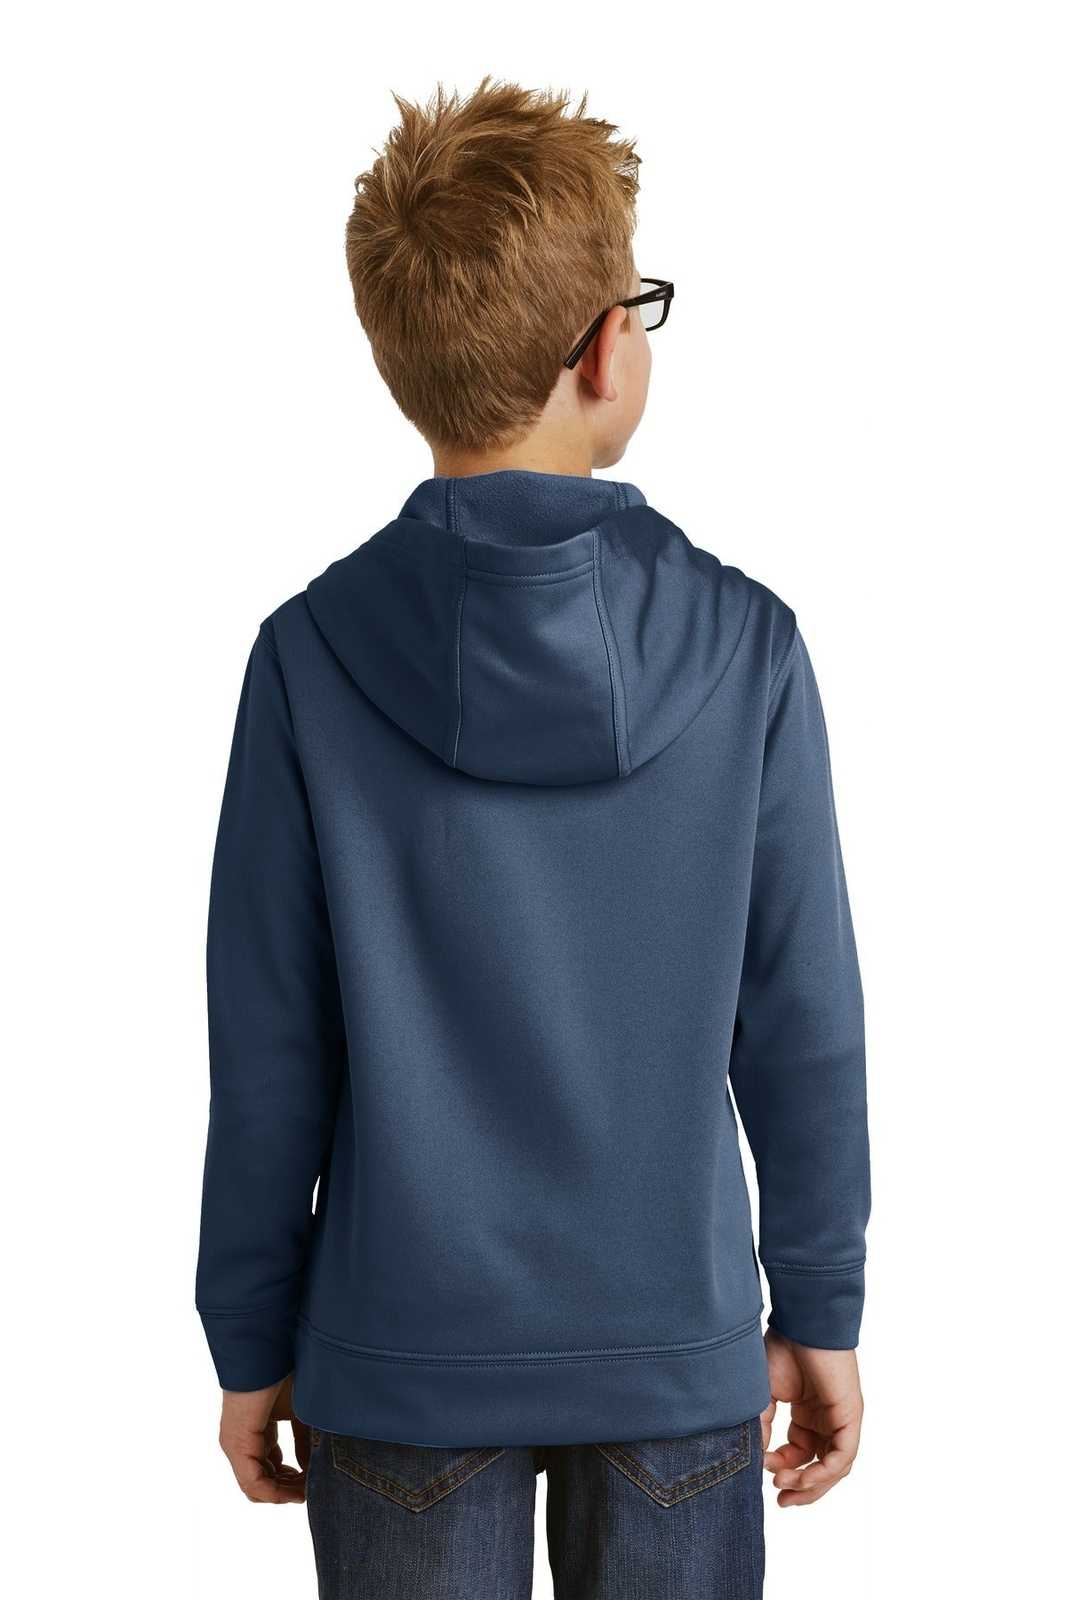 Port &amp; Company PC590YH Youth Performance Fleece Pullover Hooded Sweatshirt - Deep Navy - HIT a Double - 2